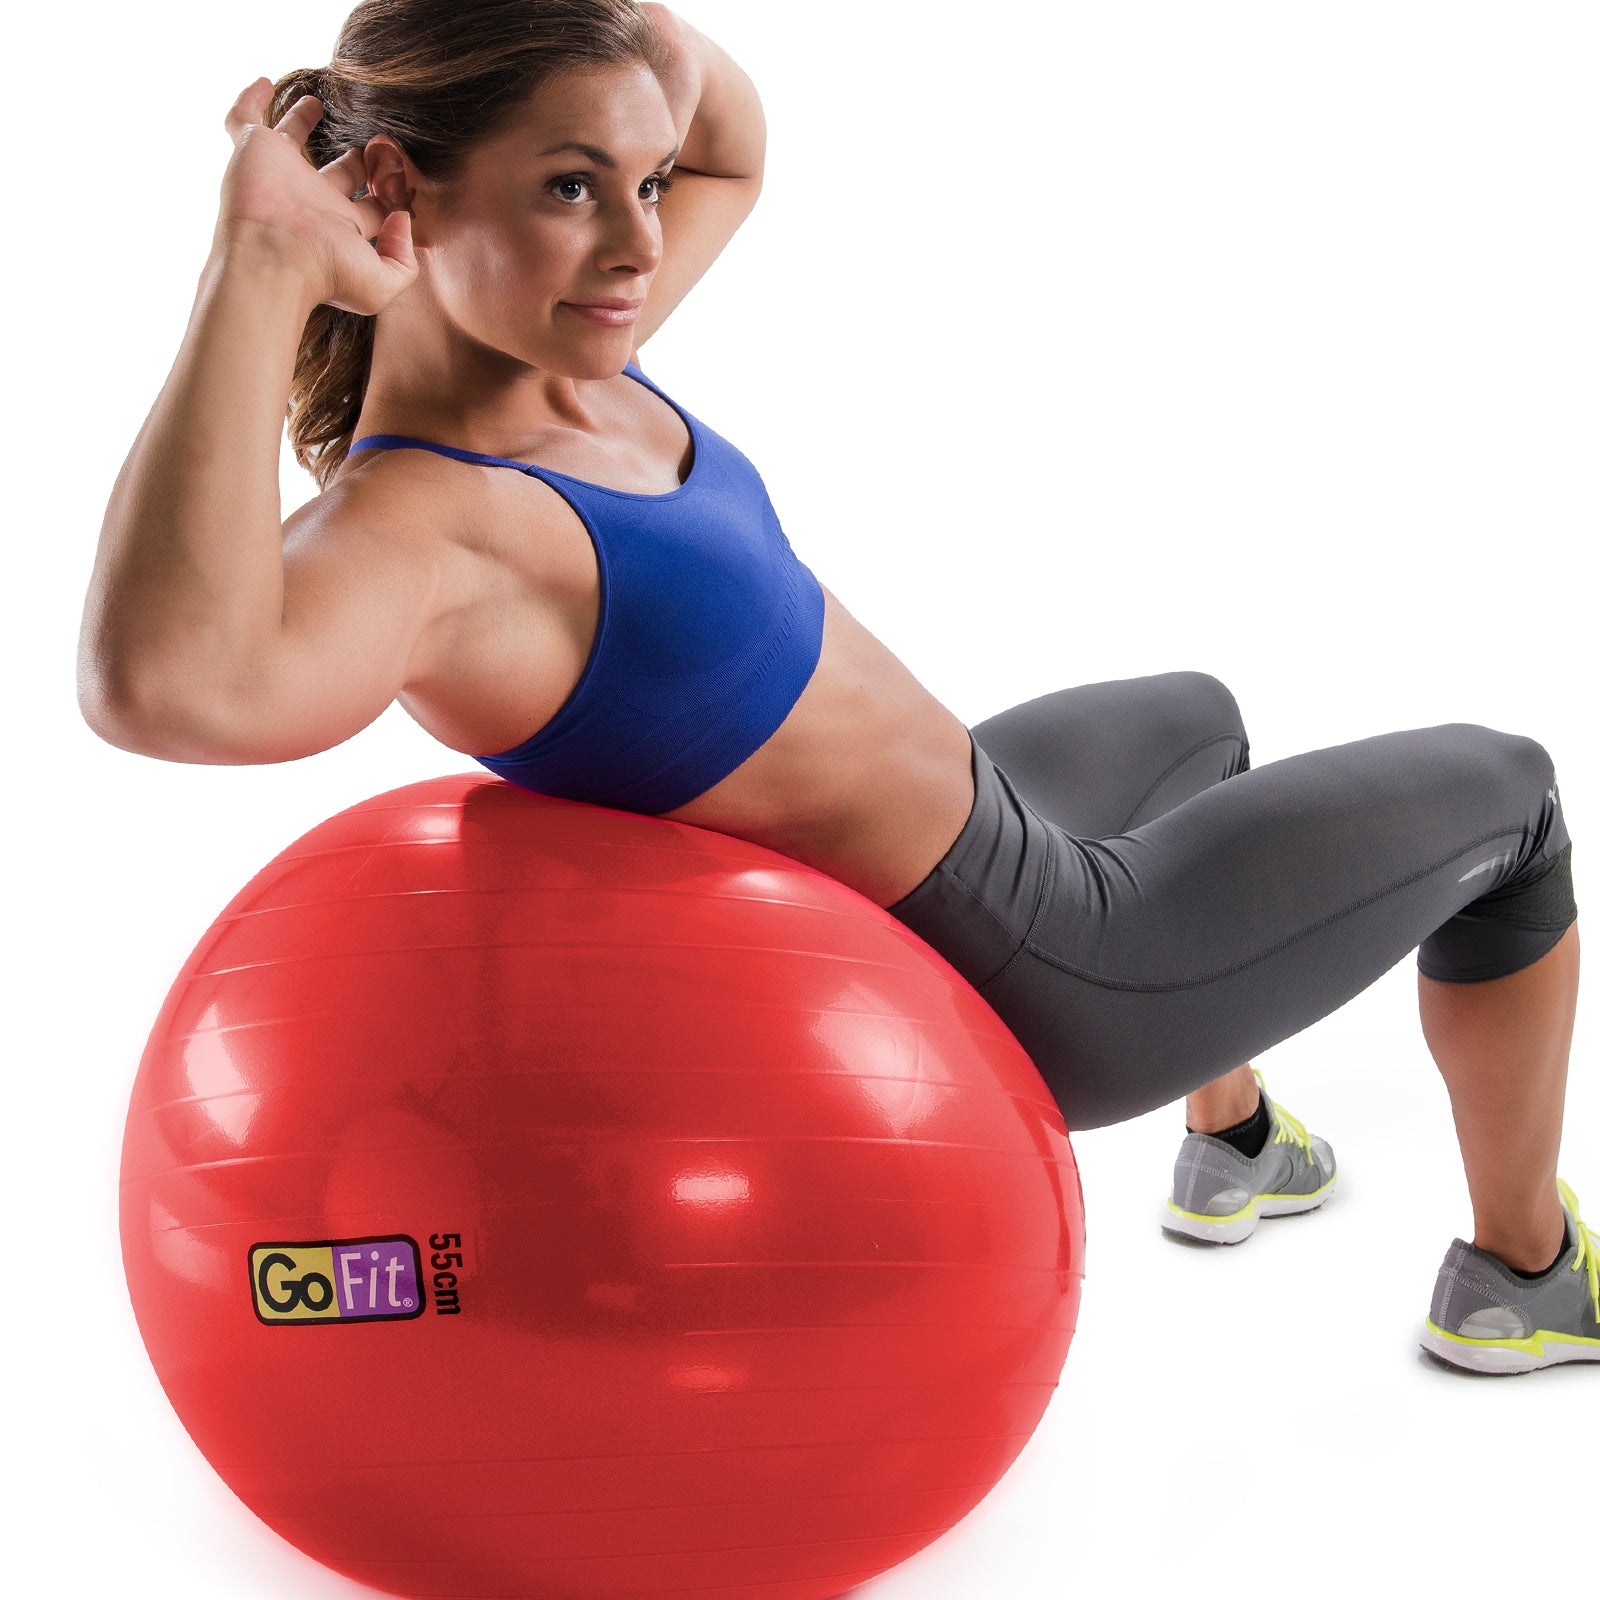 Stability Ball –